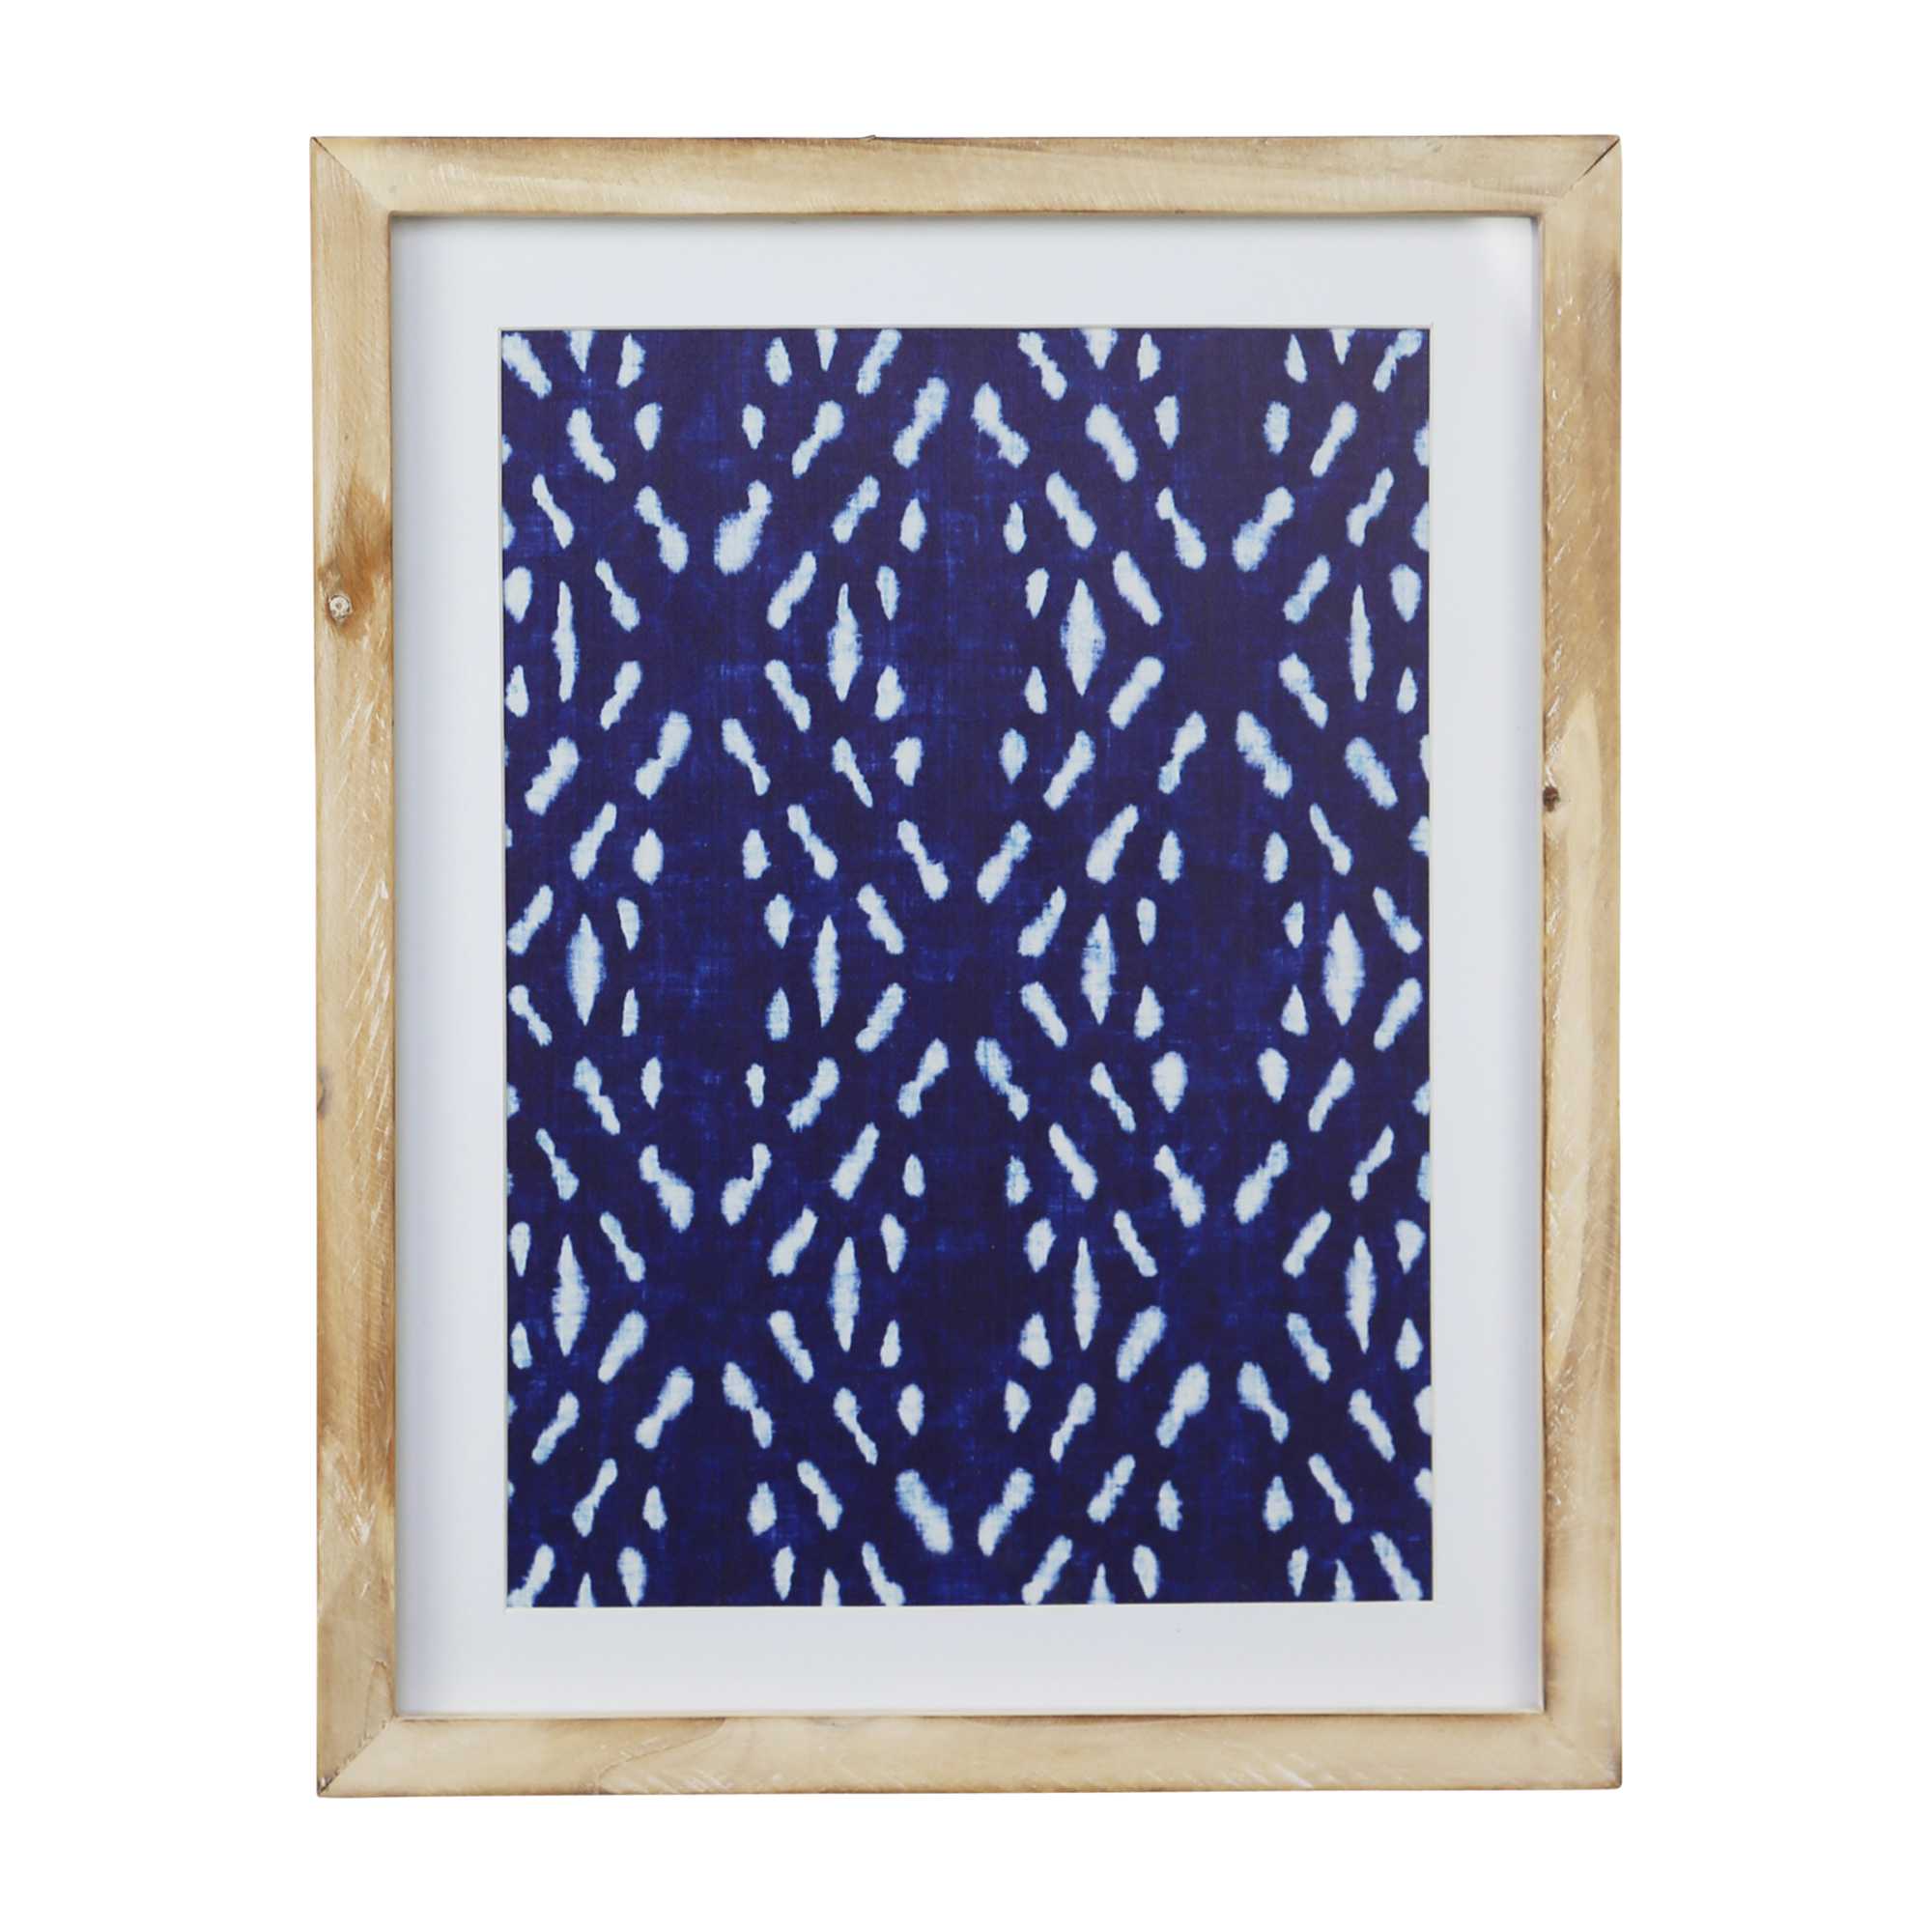 11" X 14" Geometric Design Framed Wall Art with Glass Features